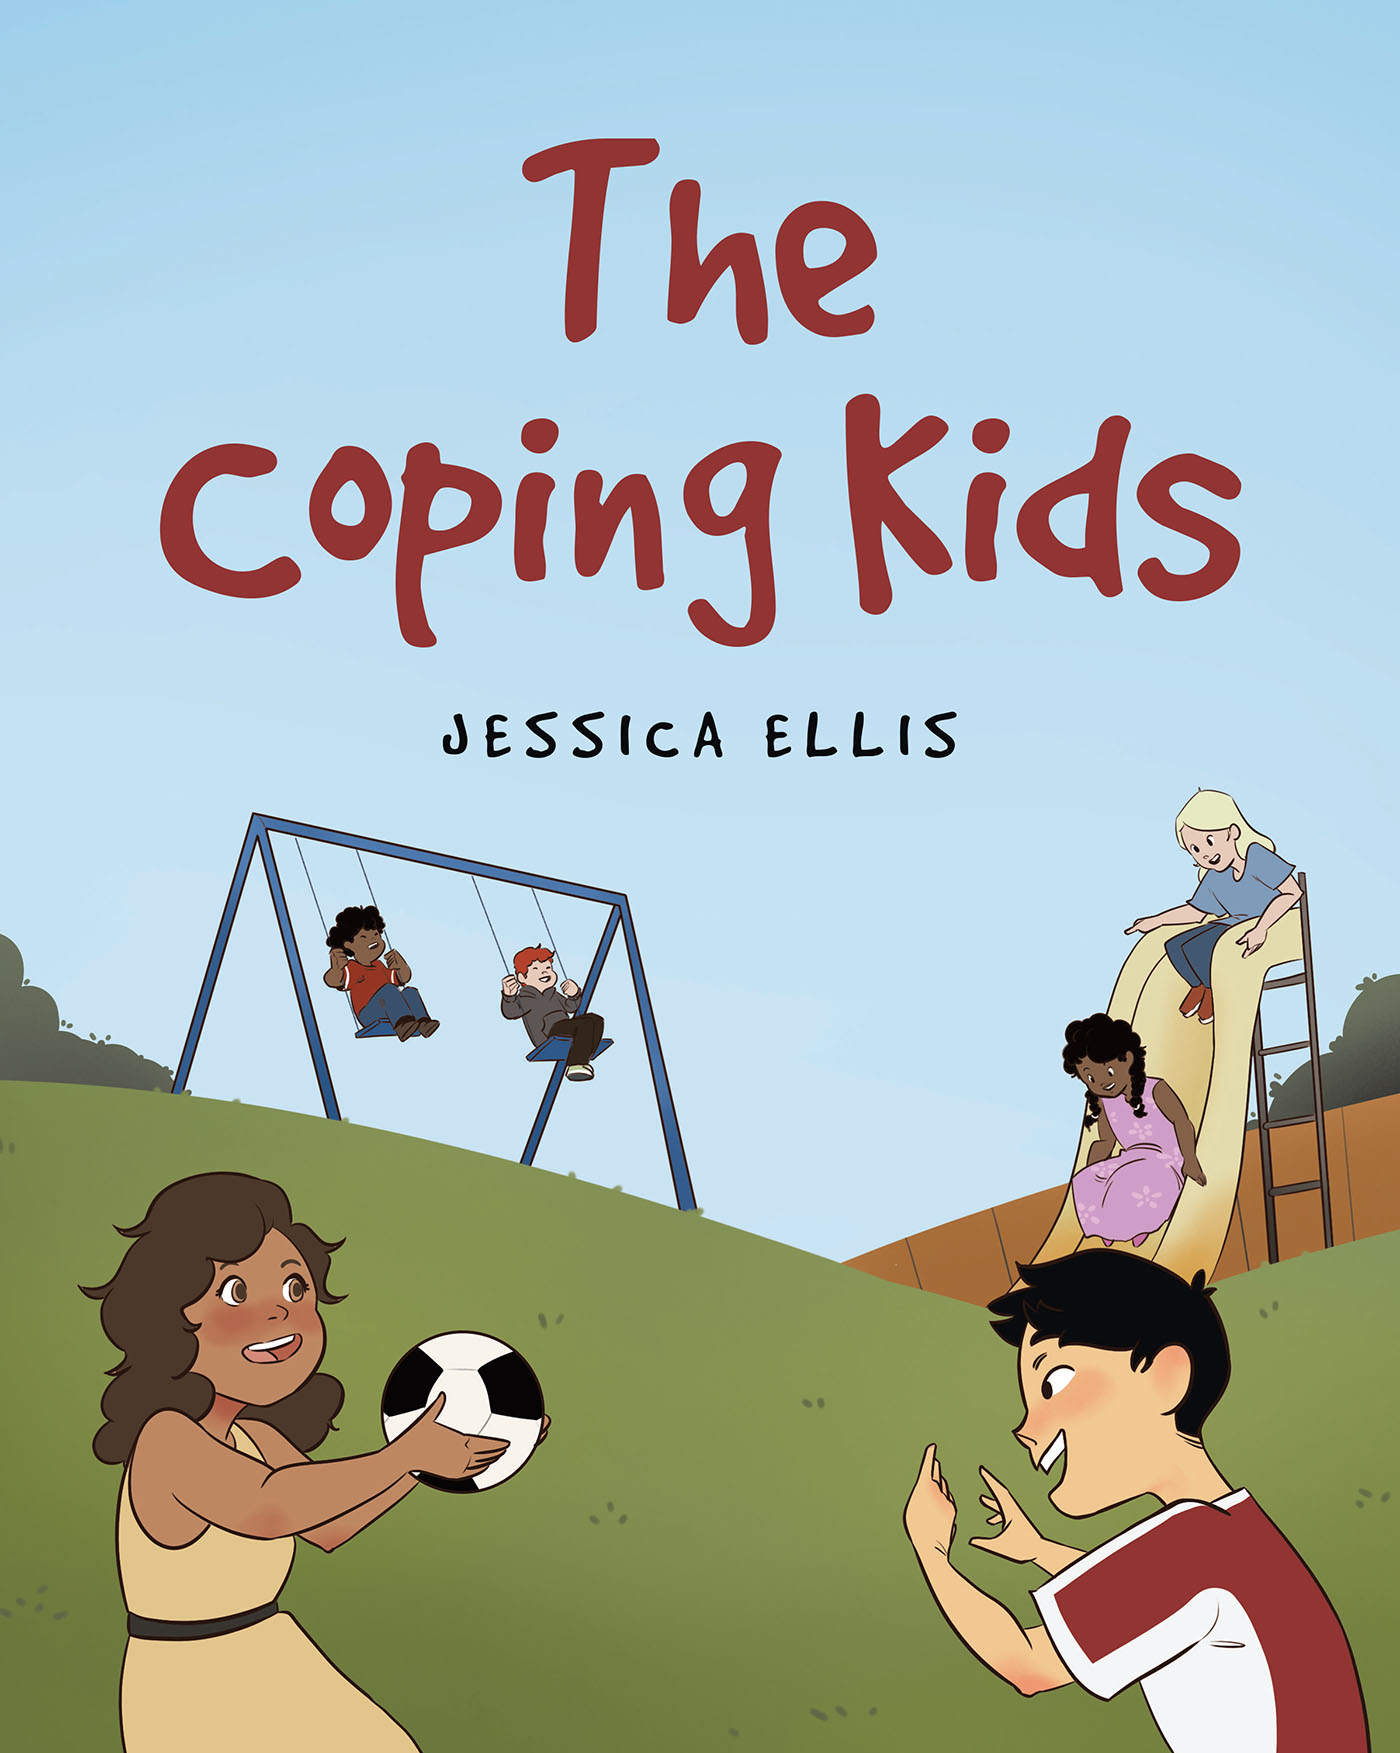 Jessica Ellis’s New Book, "The Coping Kids," is an Engaging Work That Follows Six Children Who Are Given the Tools to Process Their Emotions and Must Put Them to Use